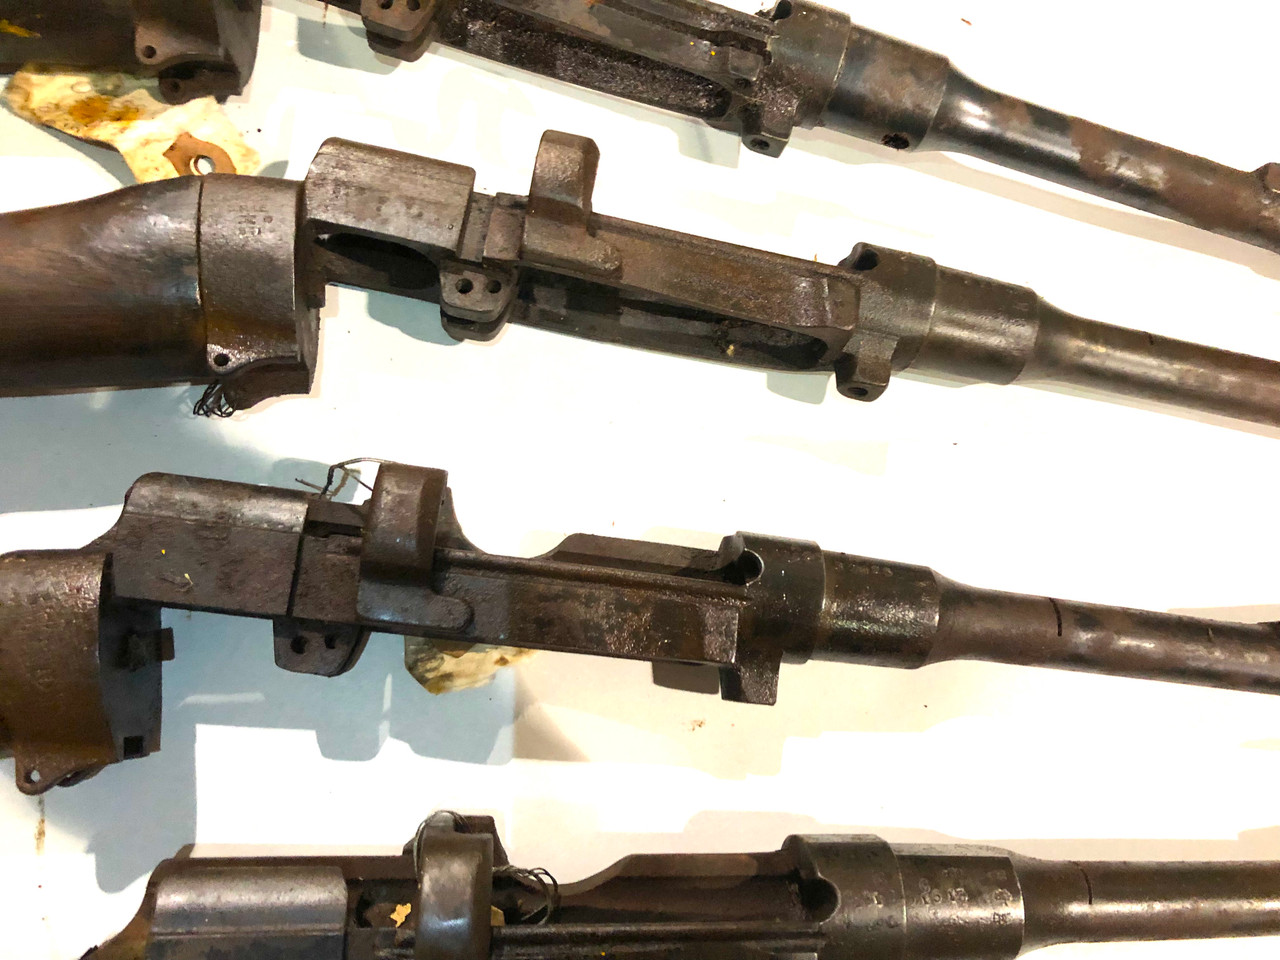 Lot 2: 5 x Lithgow No1 MKIII DP Barreled Receivers with Cut Barrels (FFL Required)